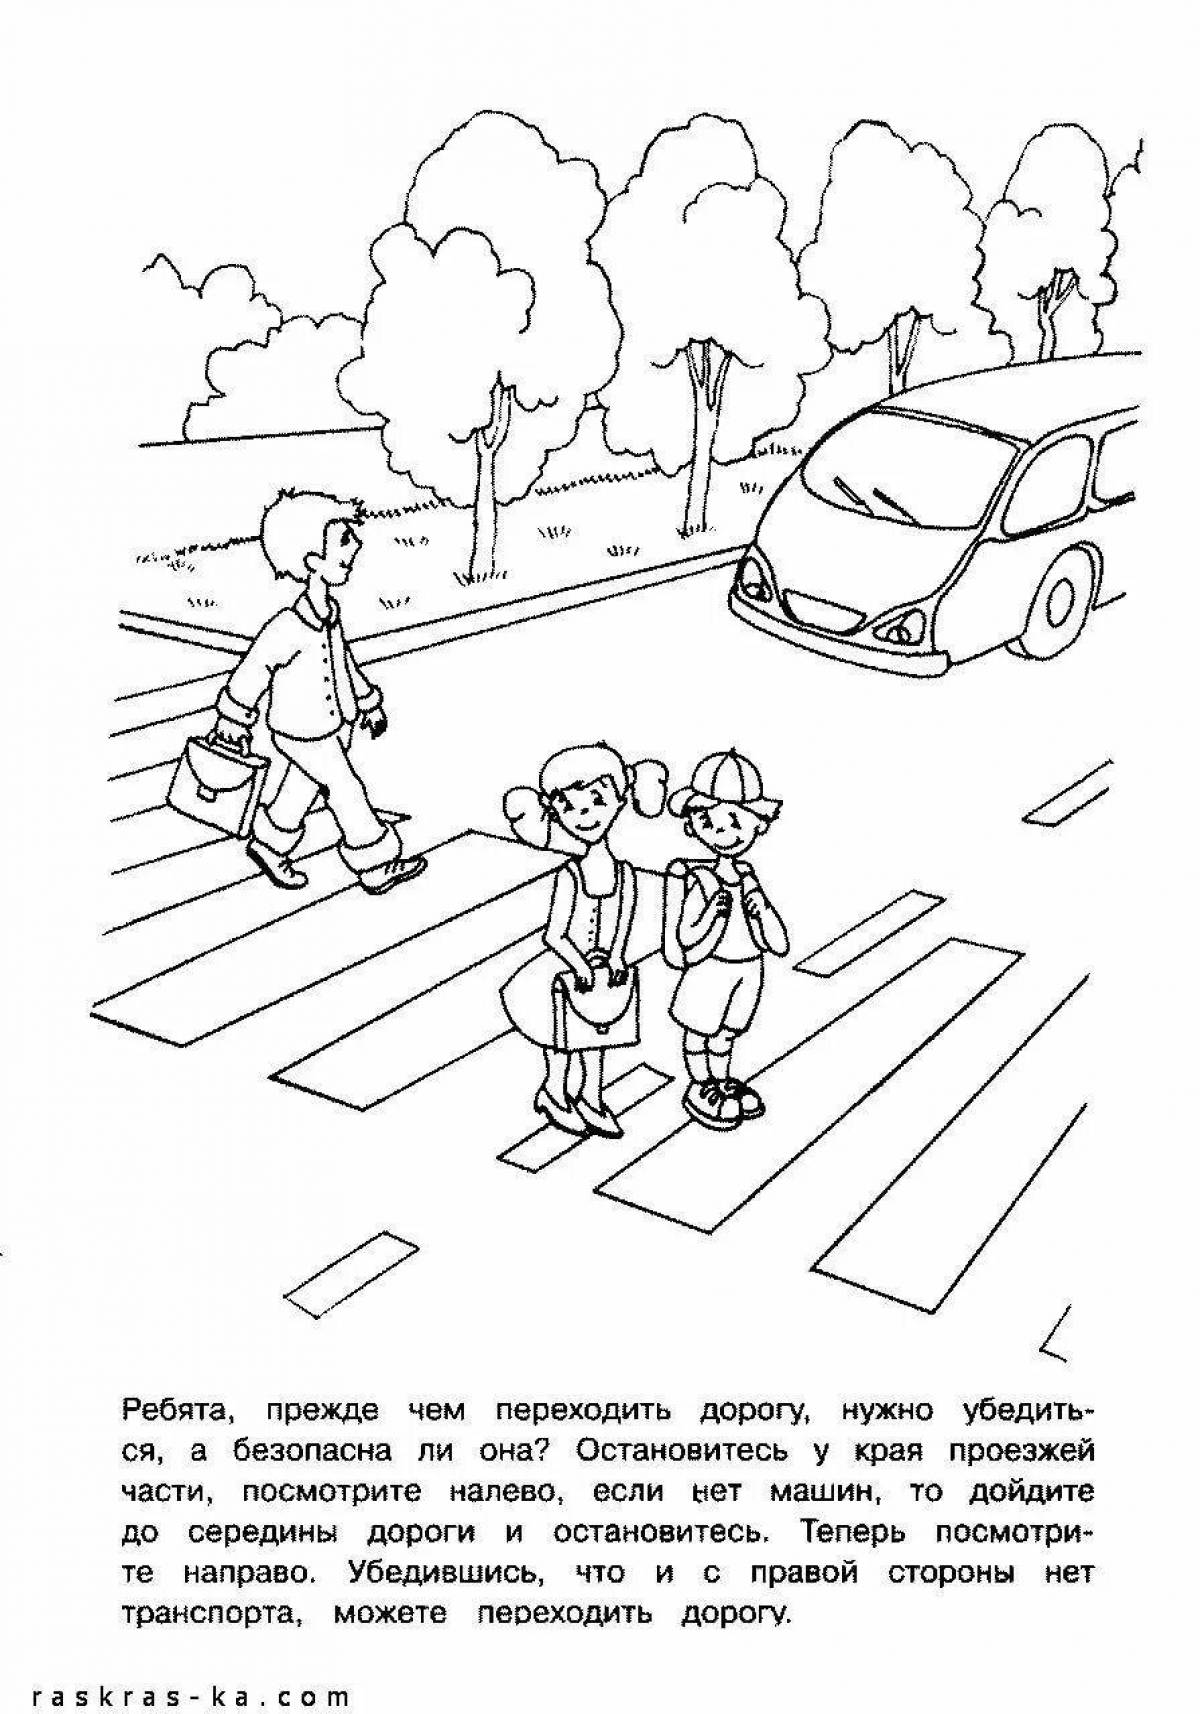 Bright rules of the road coloring book for children 5-6 years old